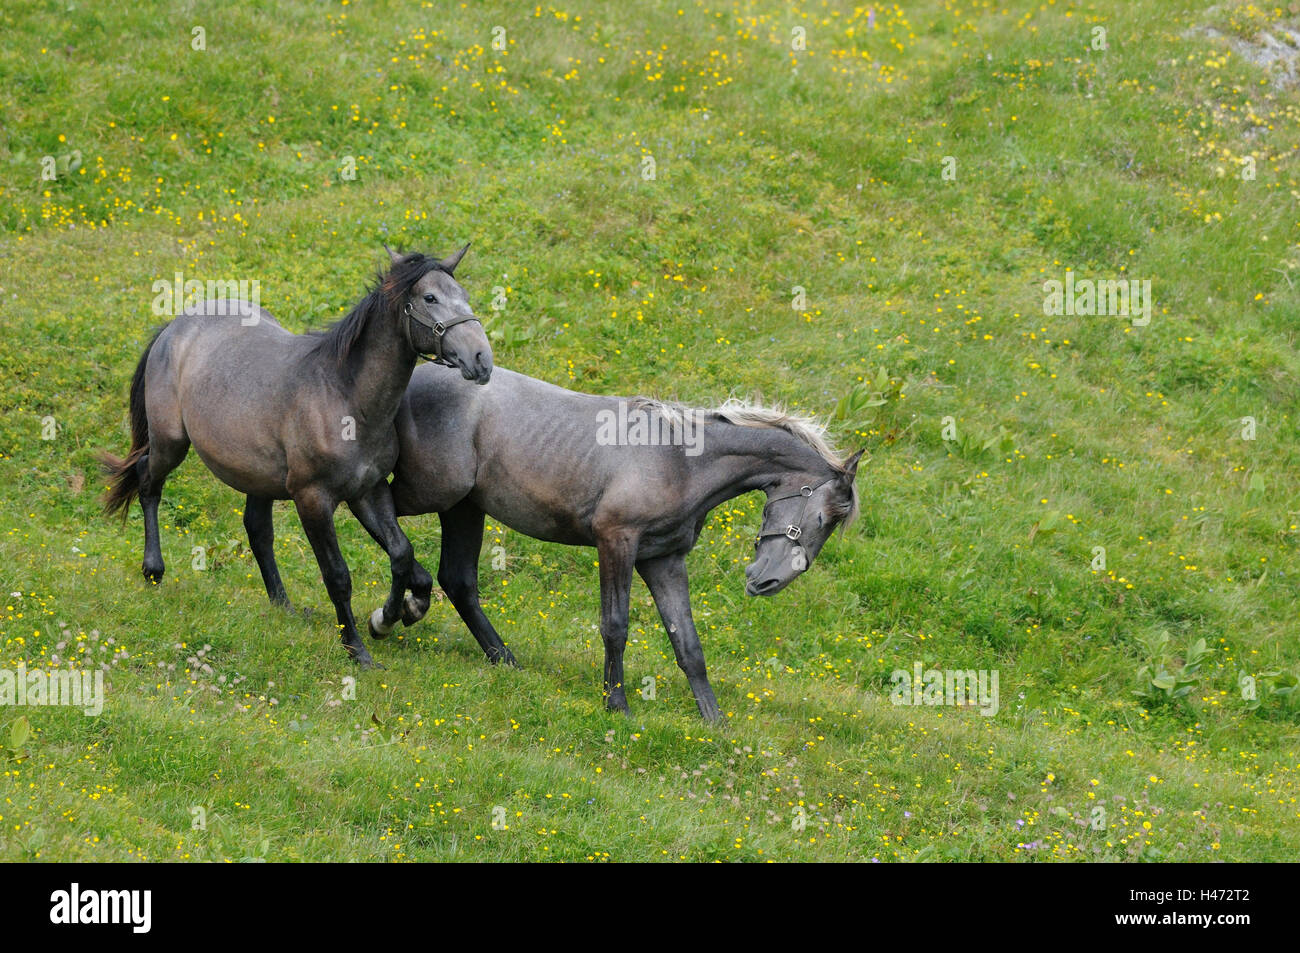 Domestic horses, Equus ferus caballus, side view, running, fight, flower meadow, scenery, Stock Photo